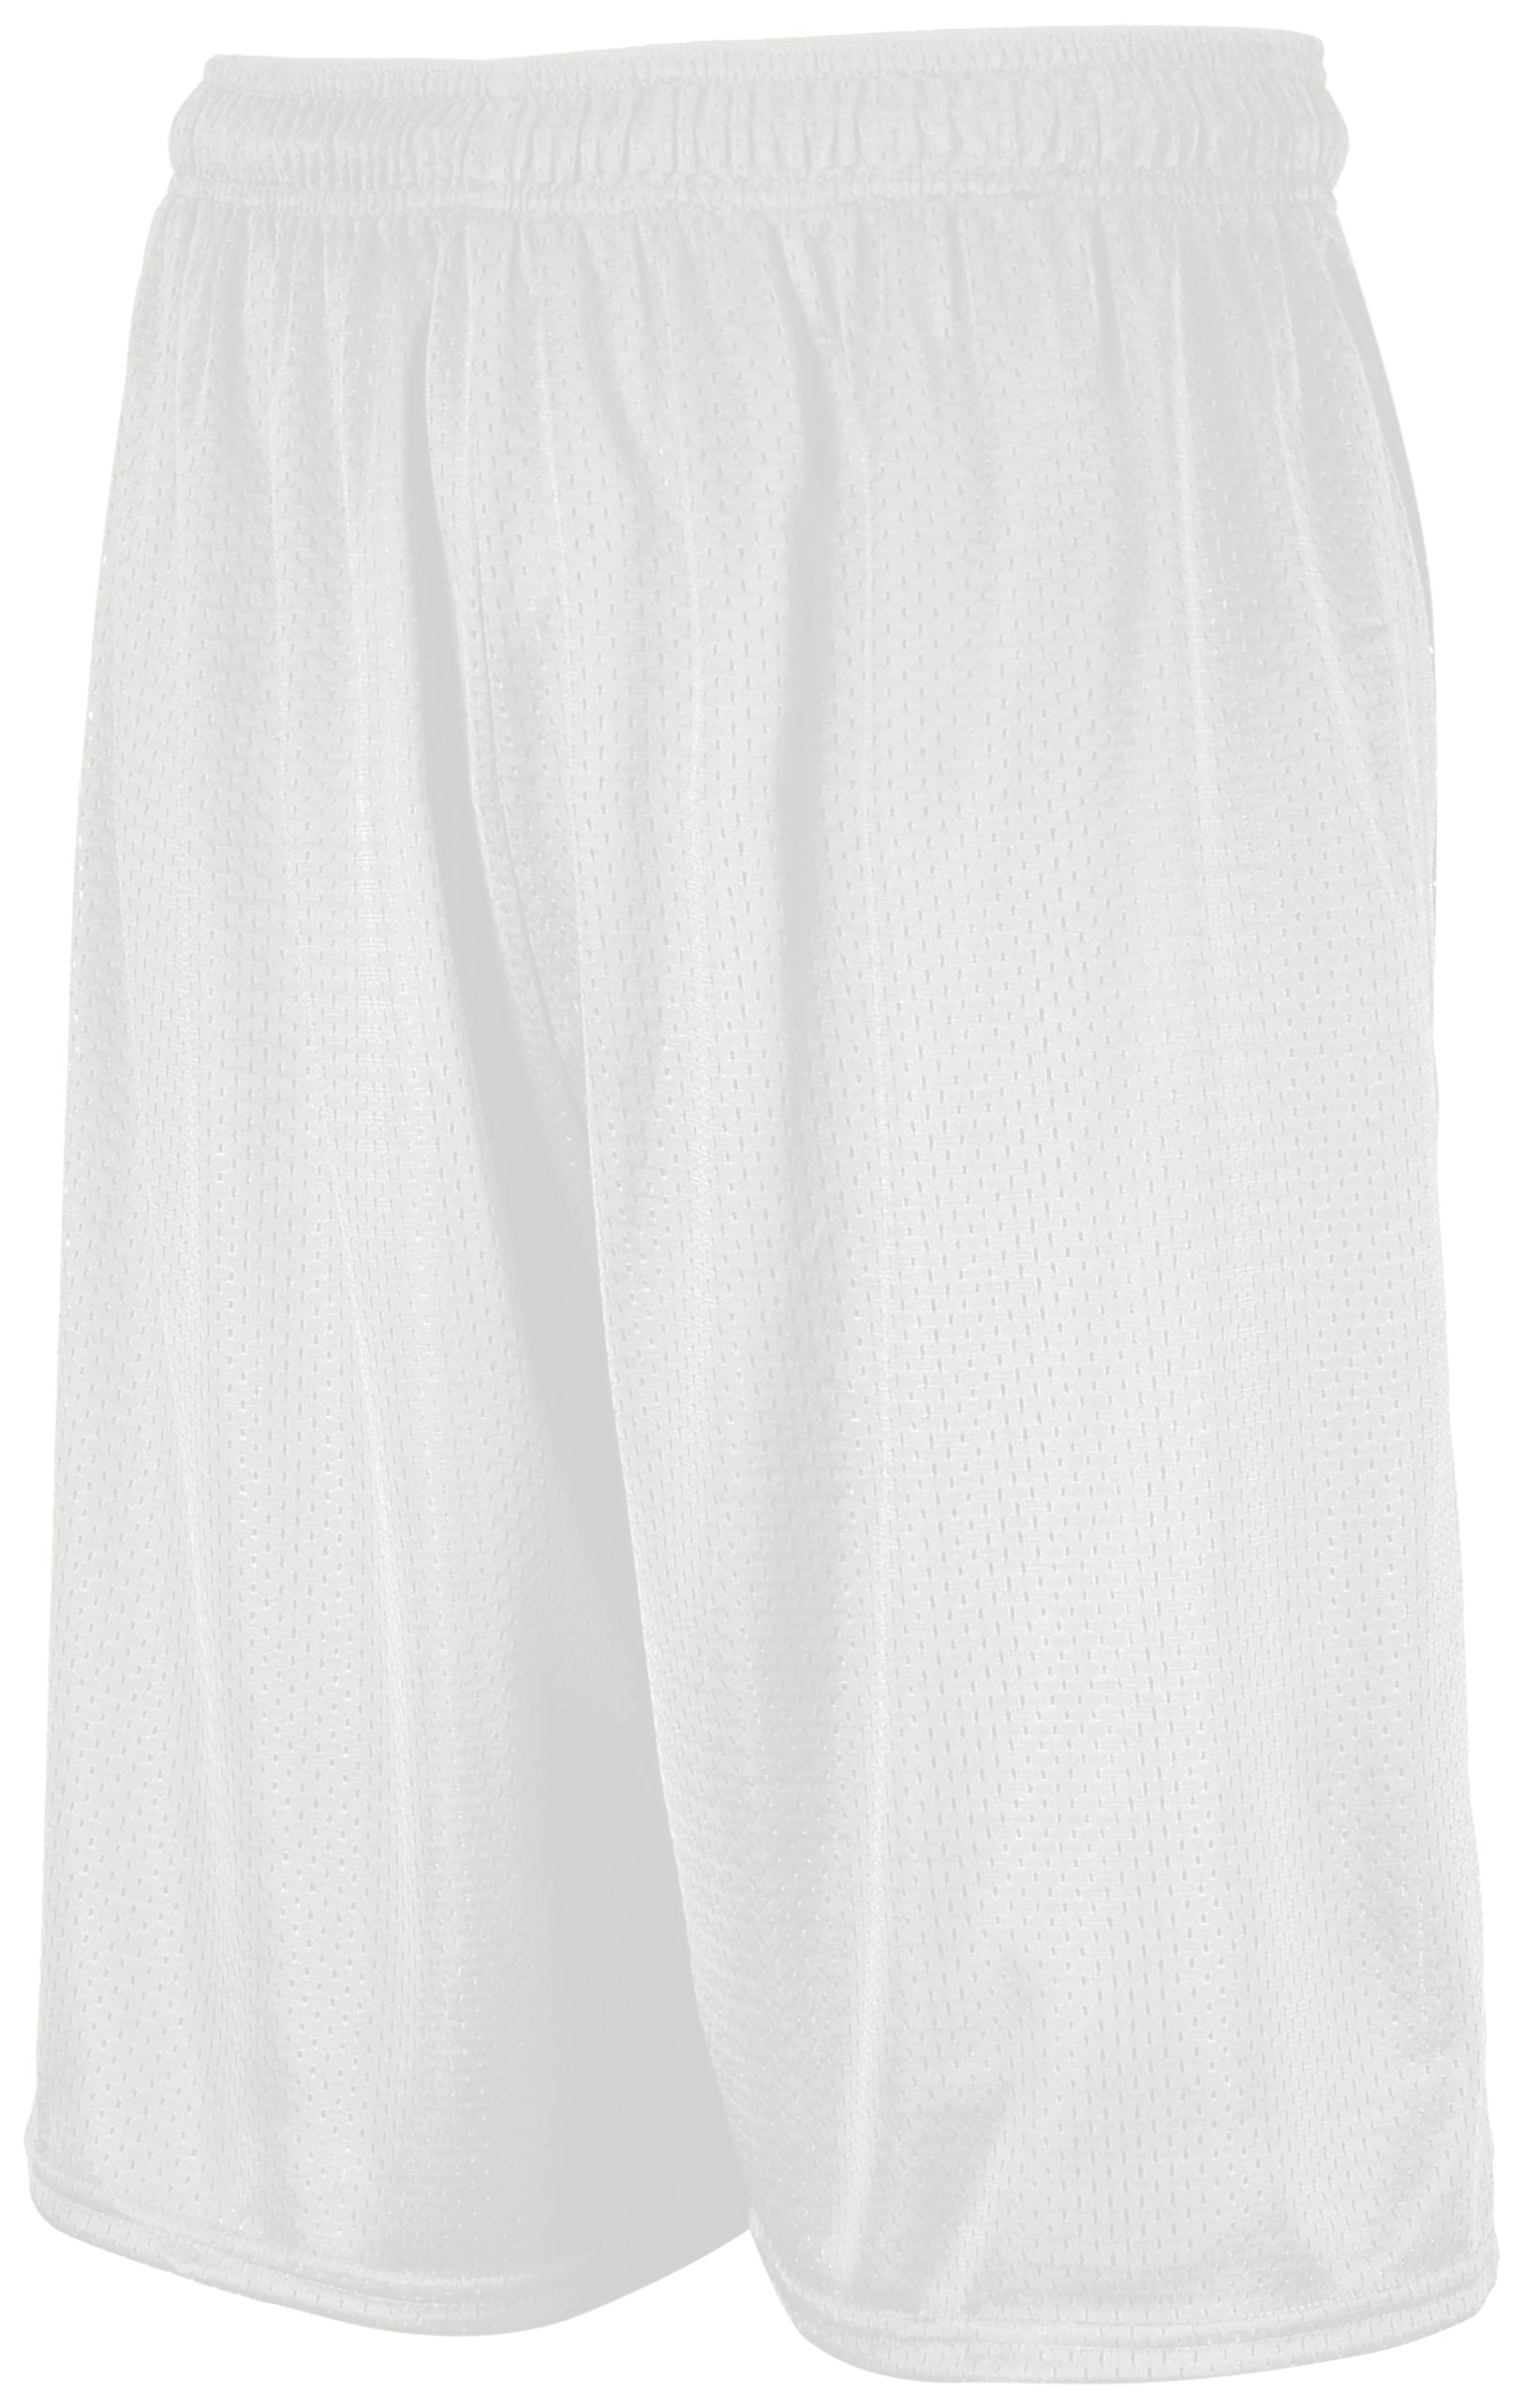 Russell Athletic Dri-Power Mesh Shorts in White  -Part of the Adult, Adult-Shorts, Russell-Athletic-Products product lines at KanaleyCreations.com